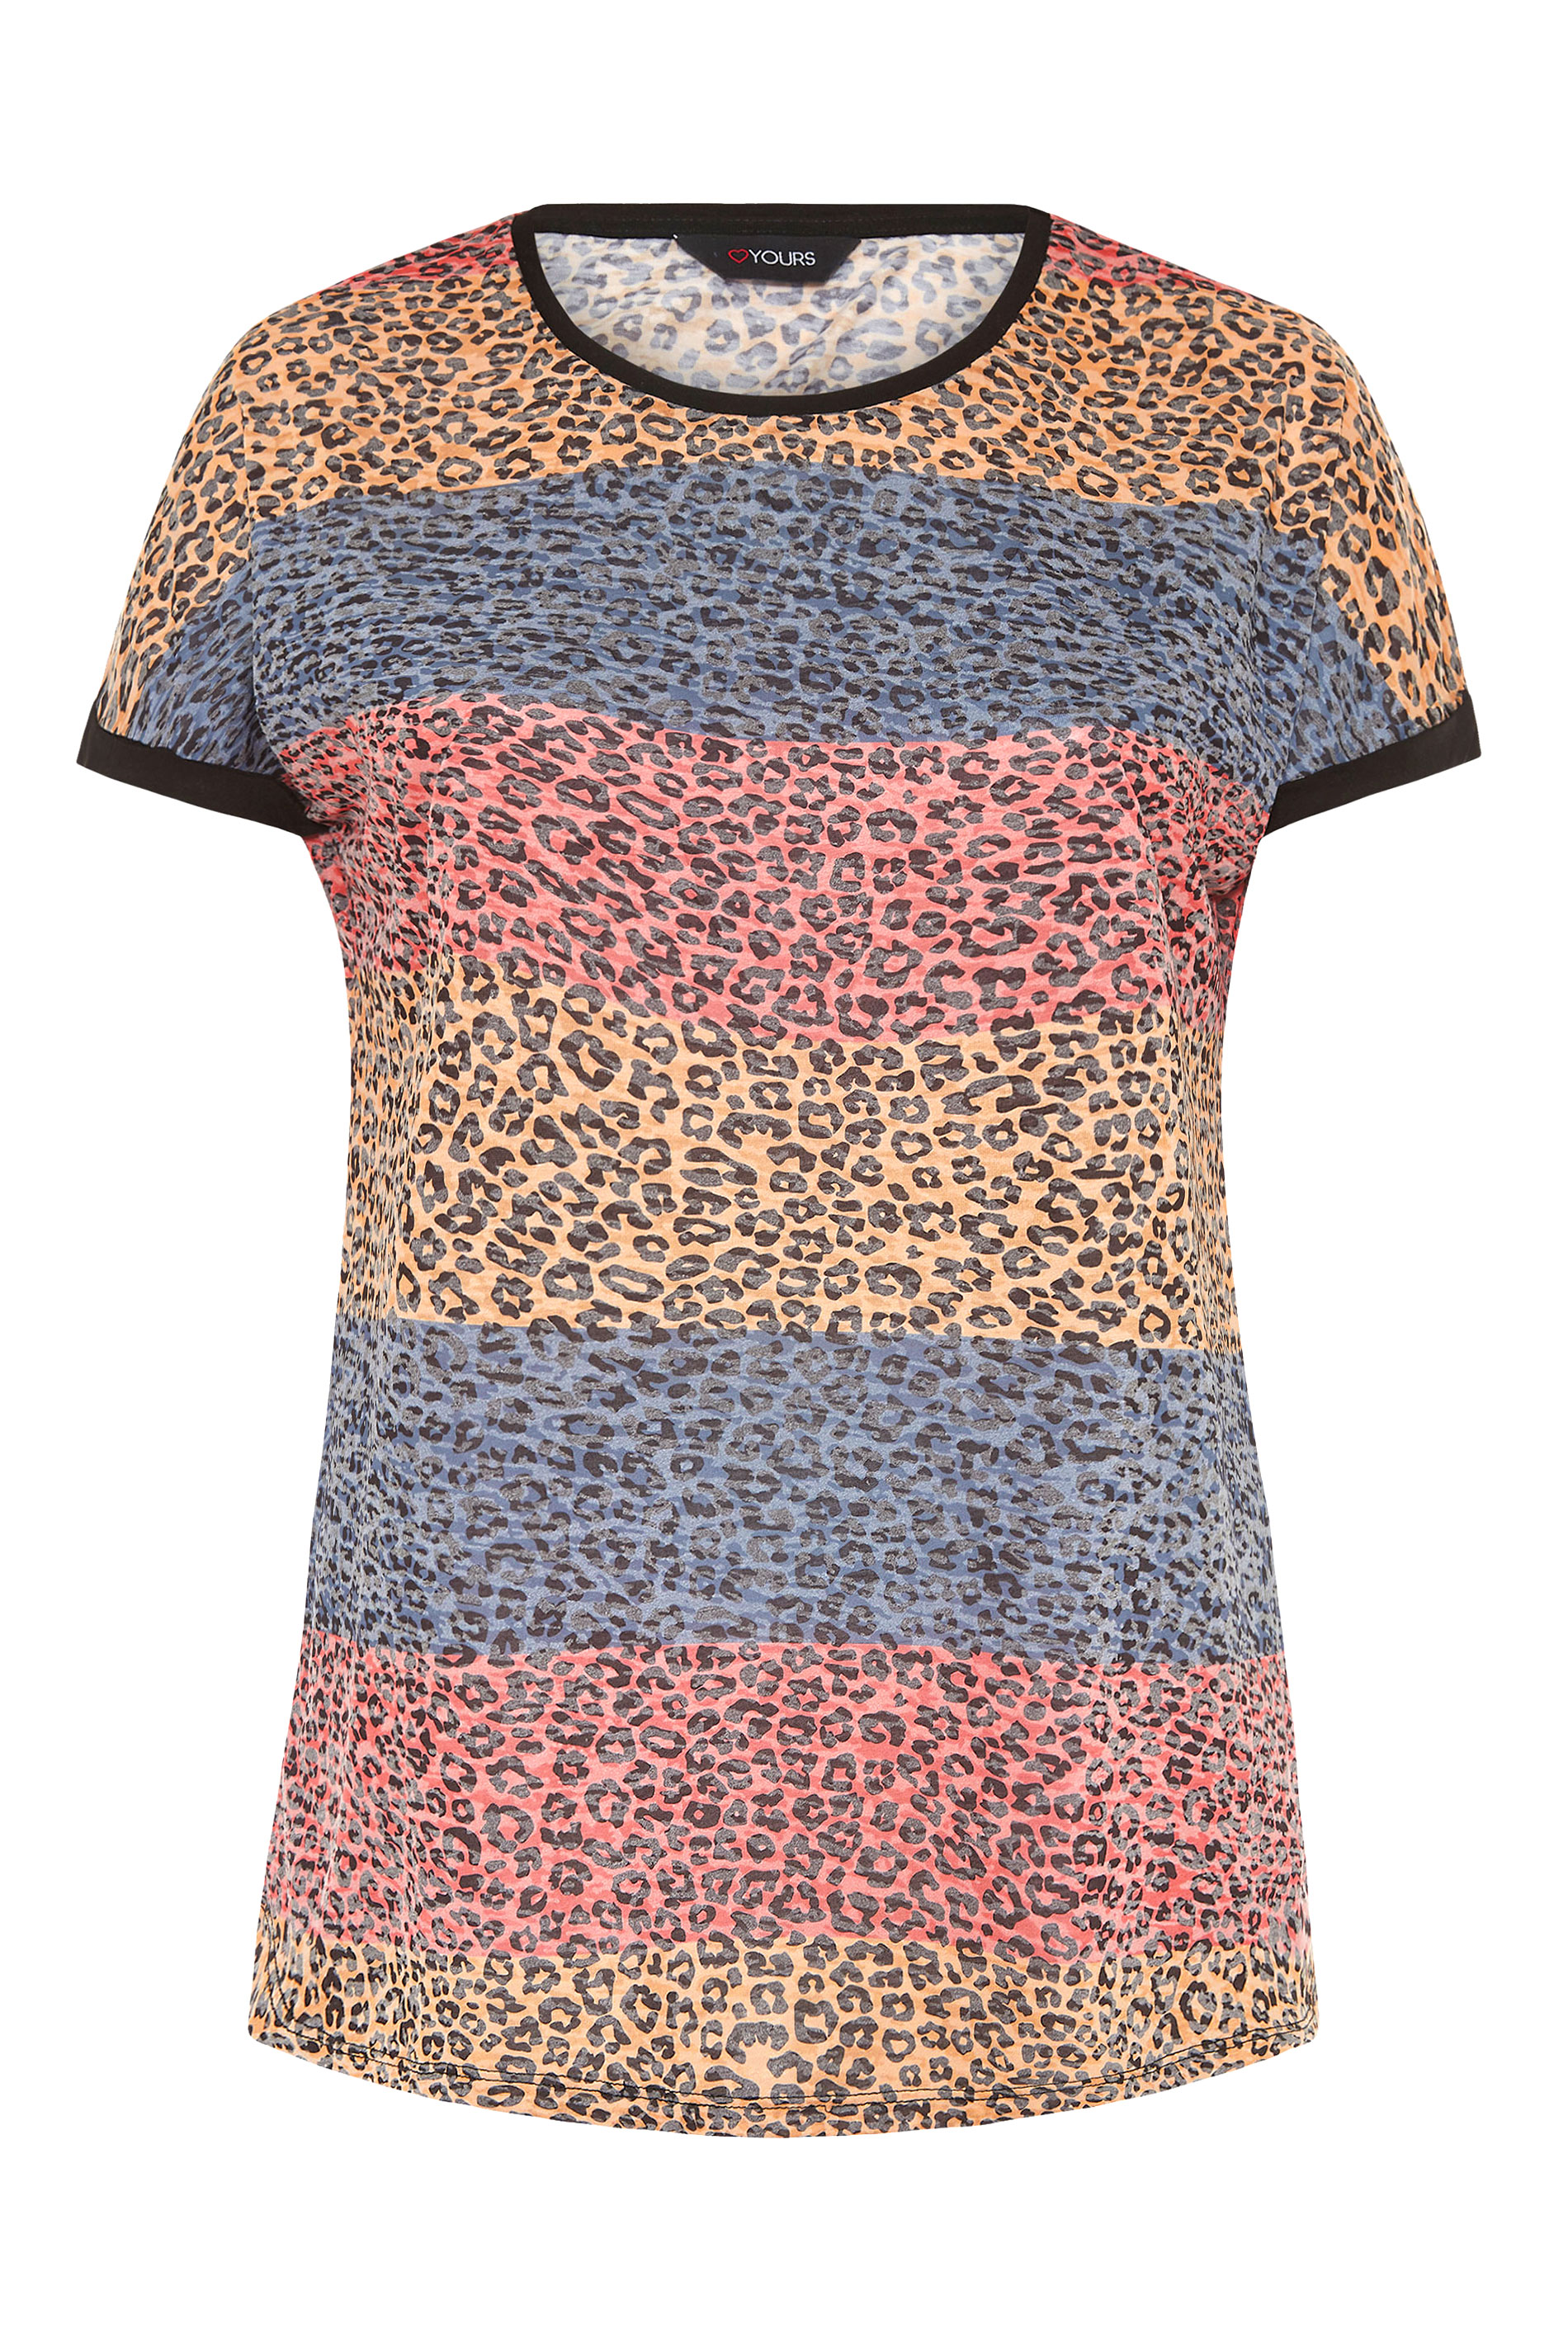 Grande taille  Tops Grande taille  T-Shirts | T-Shirt Léopard Multicolor - XQ73126